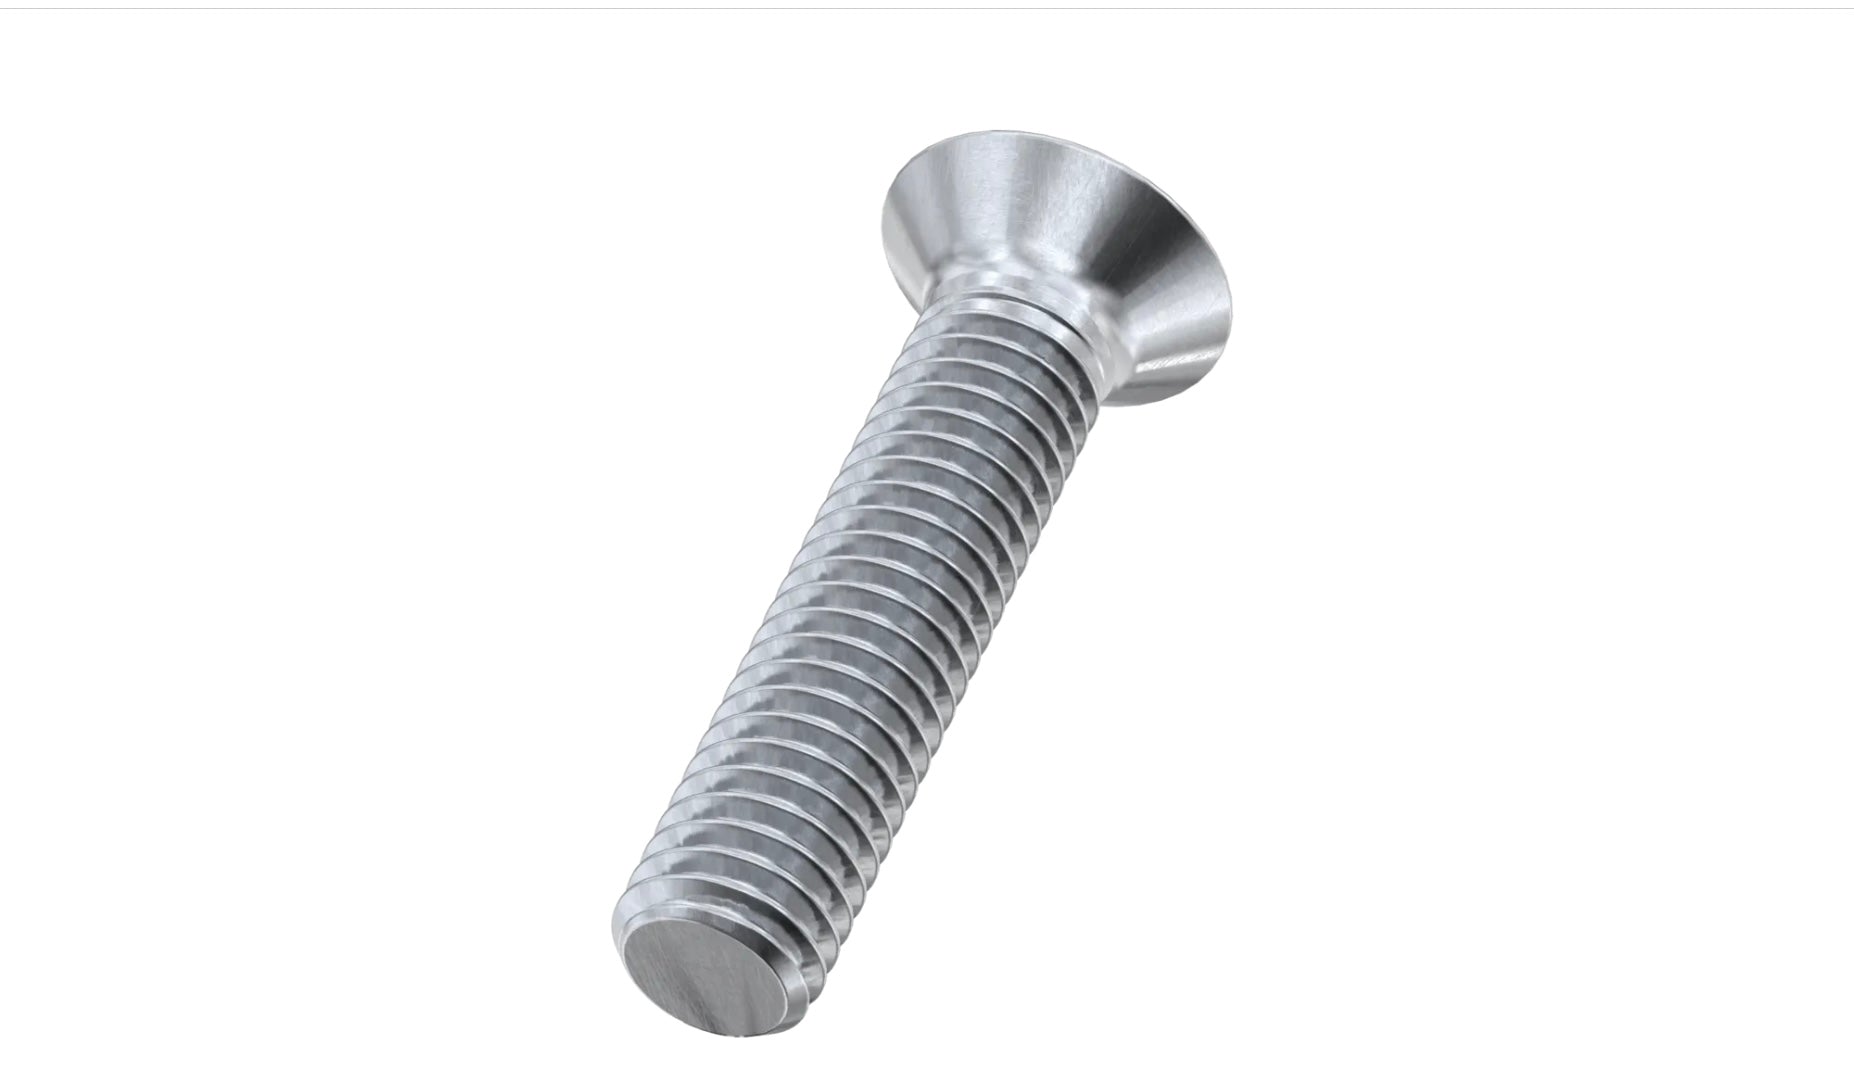 M8 x 50mm T45 Torx Countersunk Screws (ISO 14581) - Marine Stainless Steel (A4) 3BS - Worthing Watersports - SHK-M8-50-V2-A4 - Foilparts - Worthing Watersports